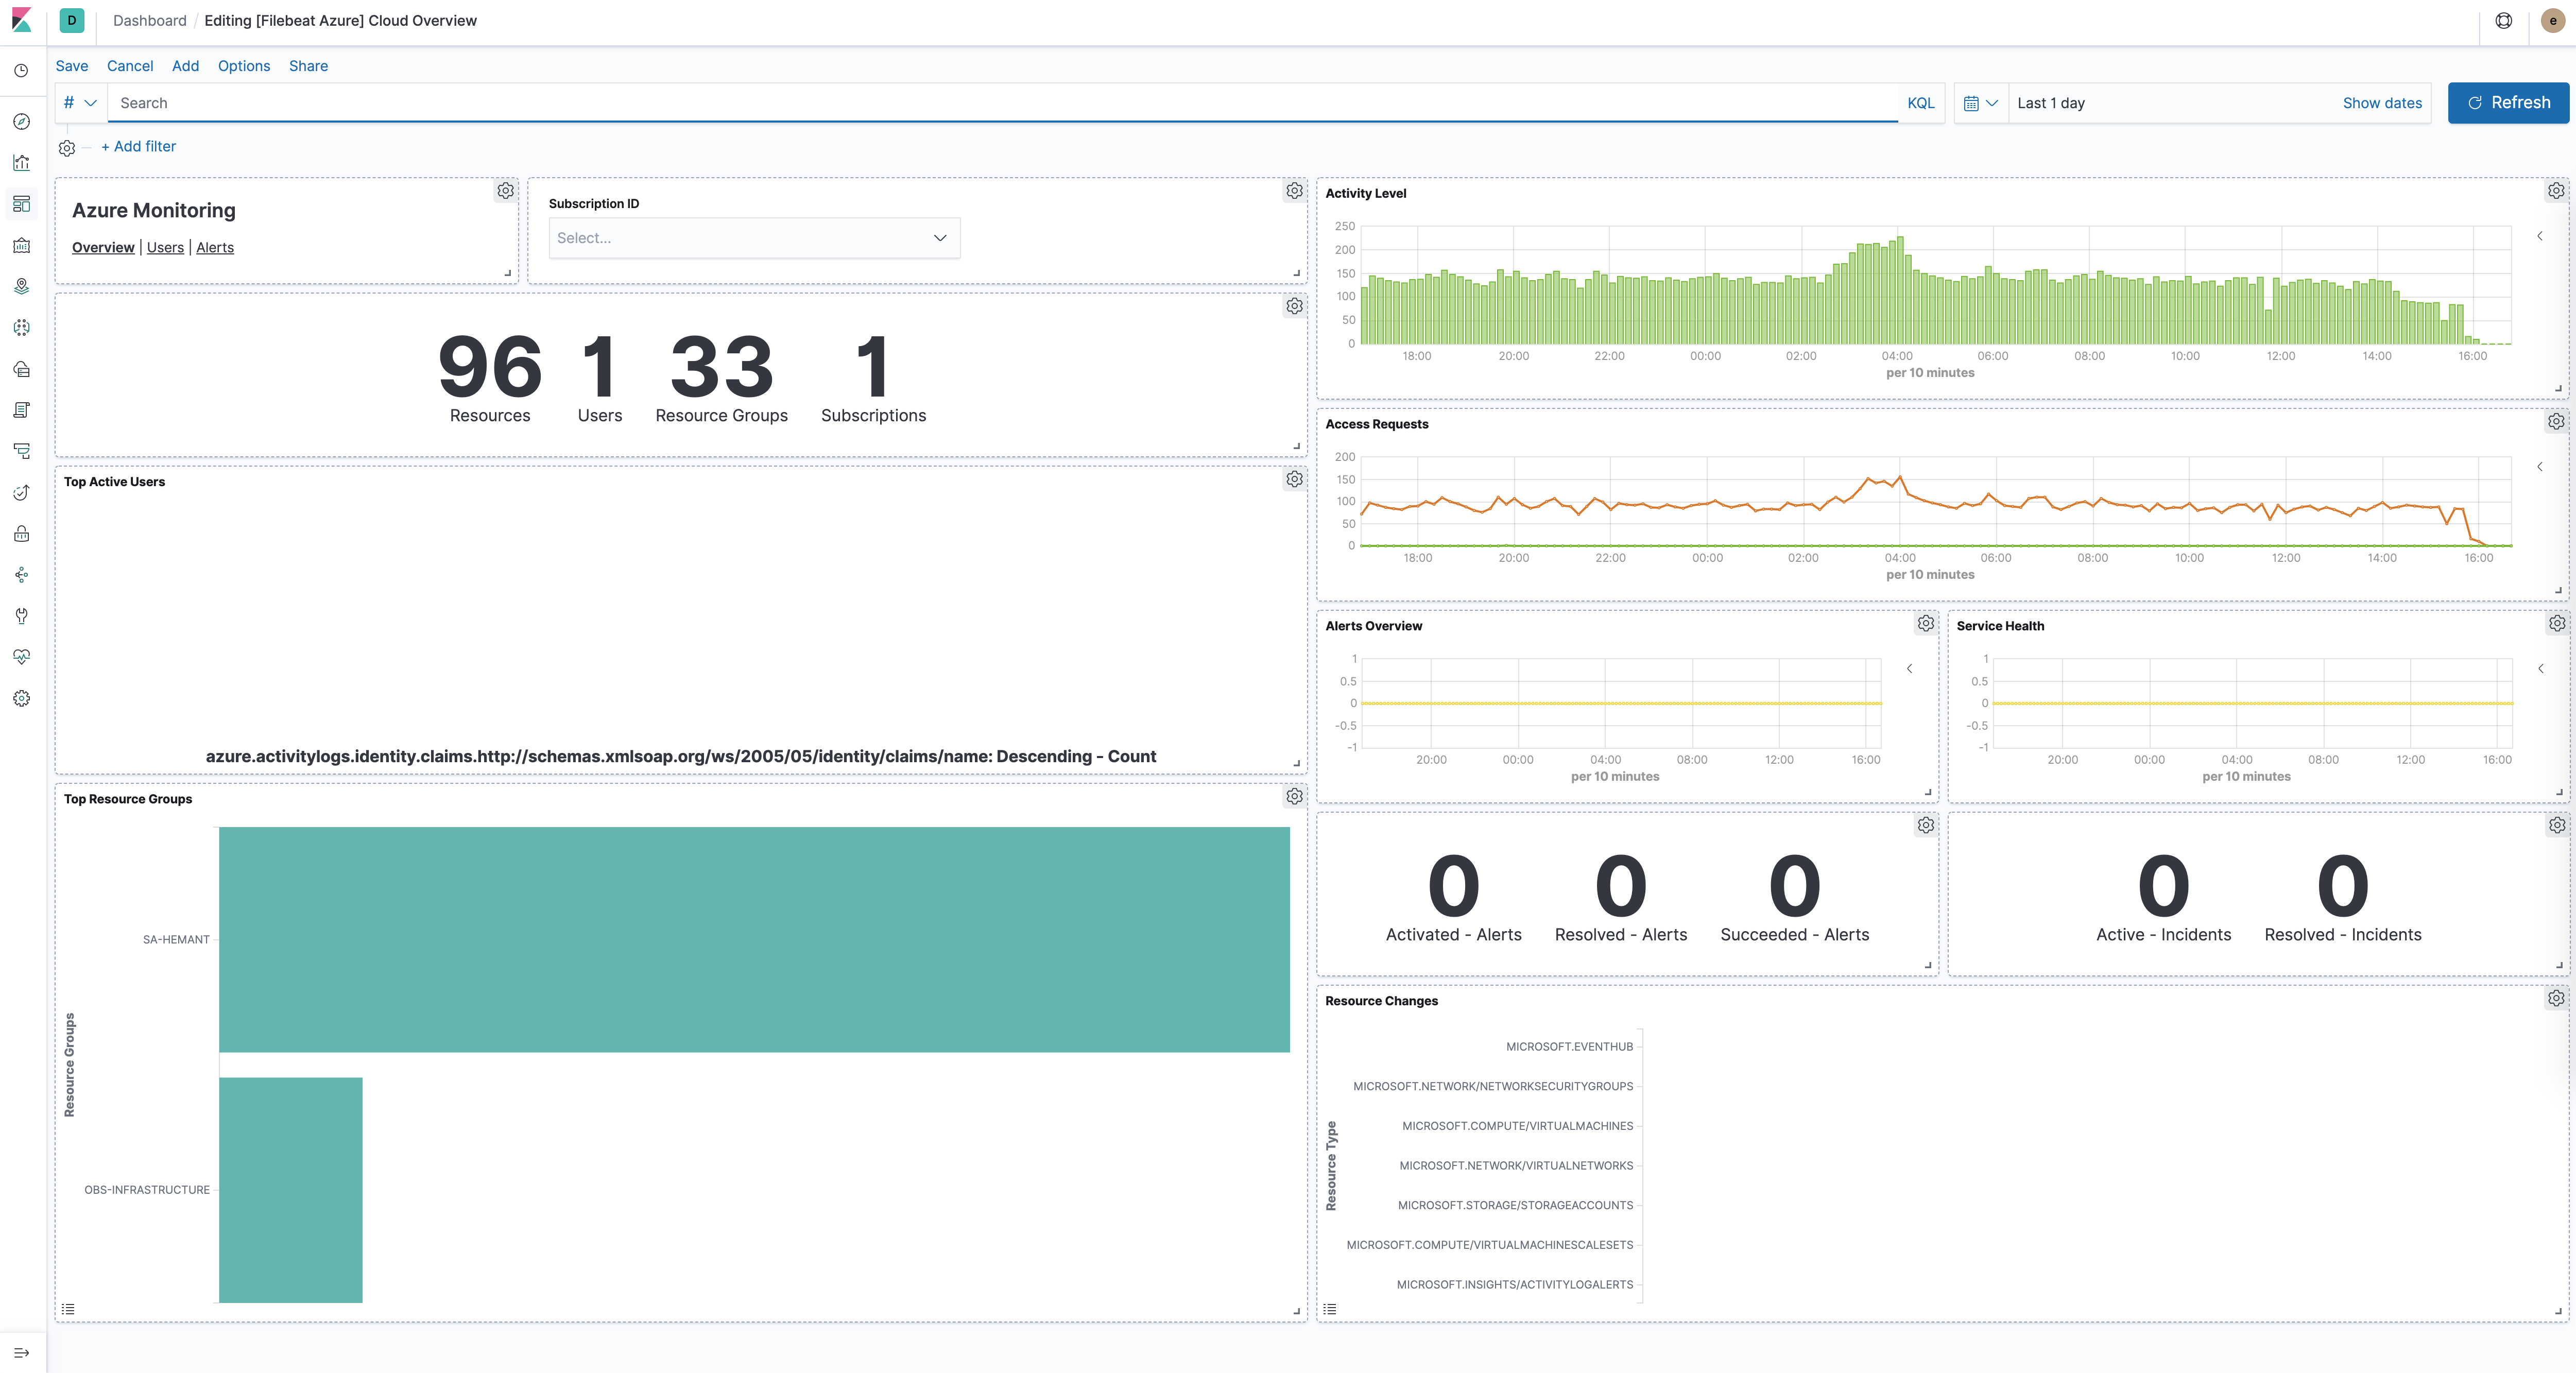 A screenshot of the Elastic on Azure dashboard for general cloud overview, user activity, and alerts.